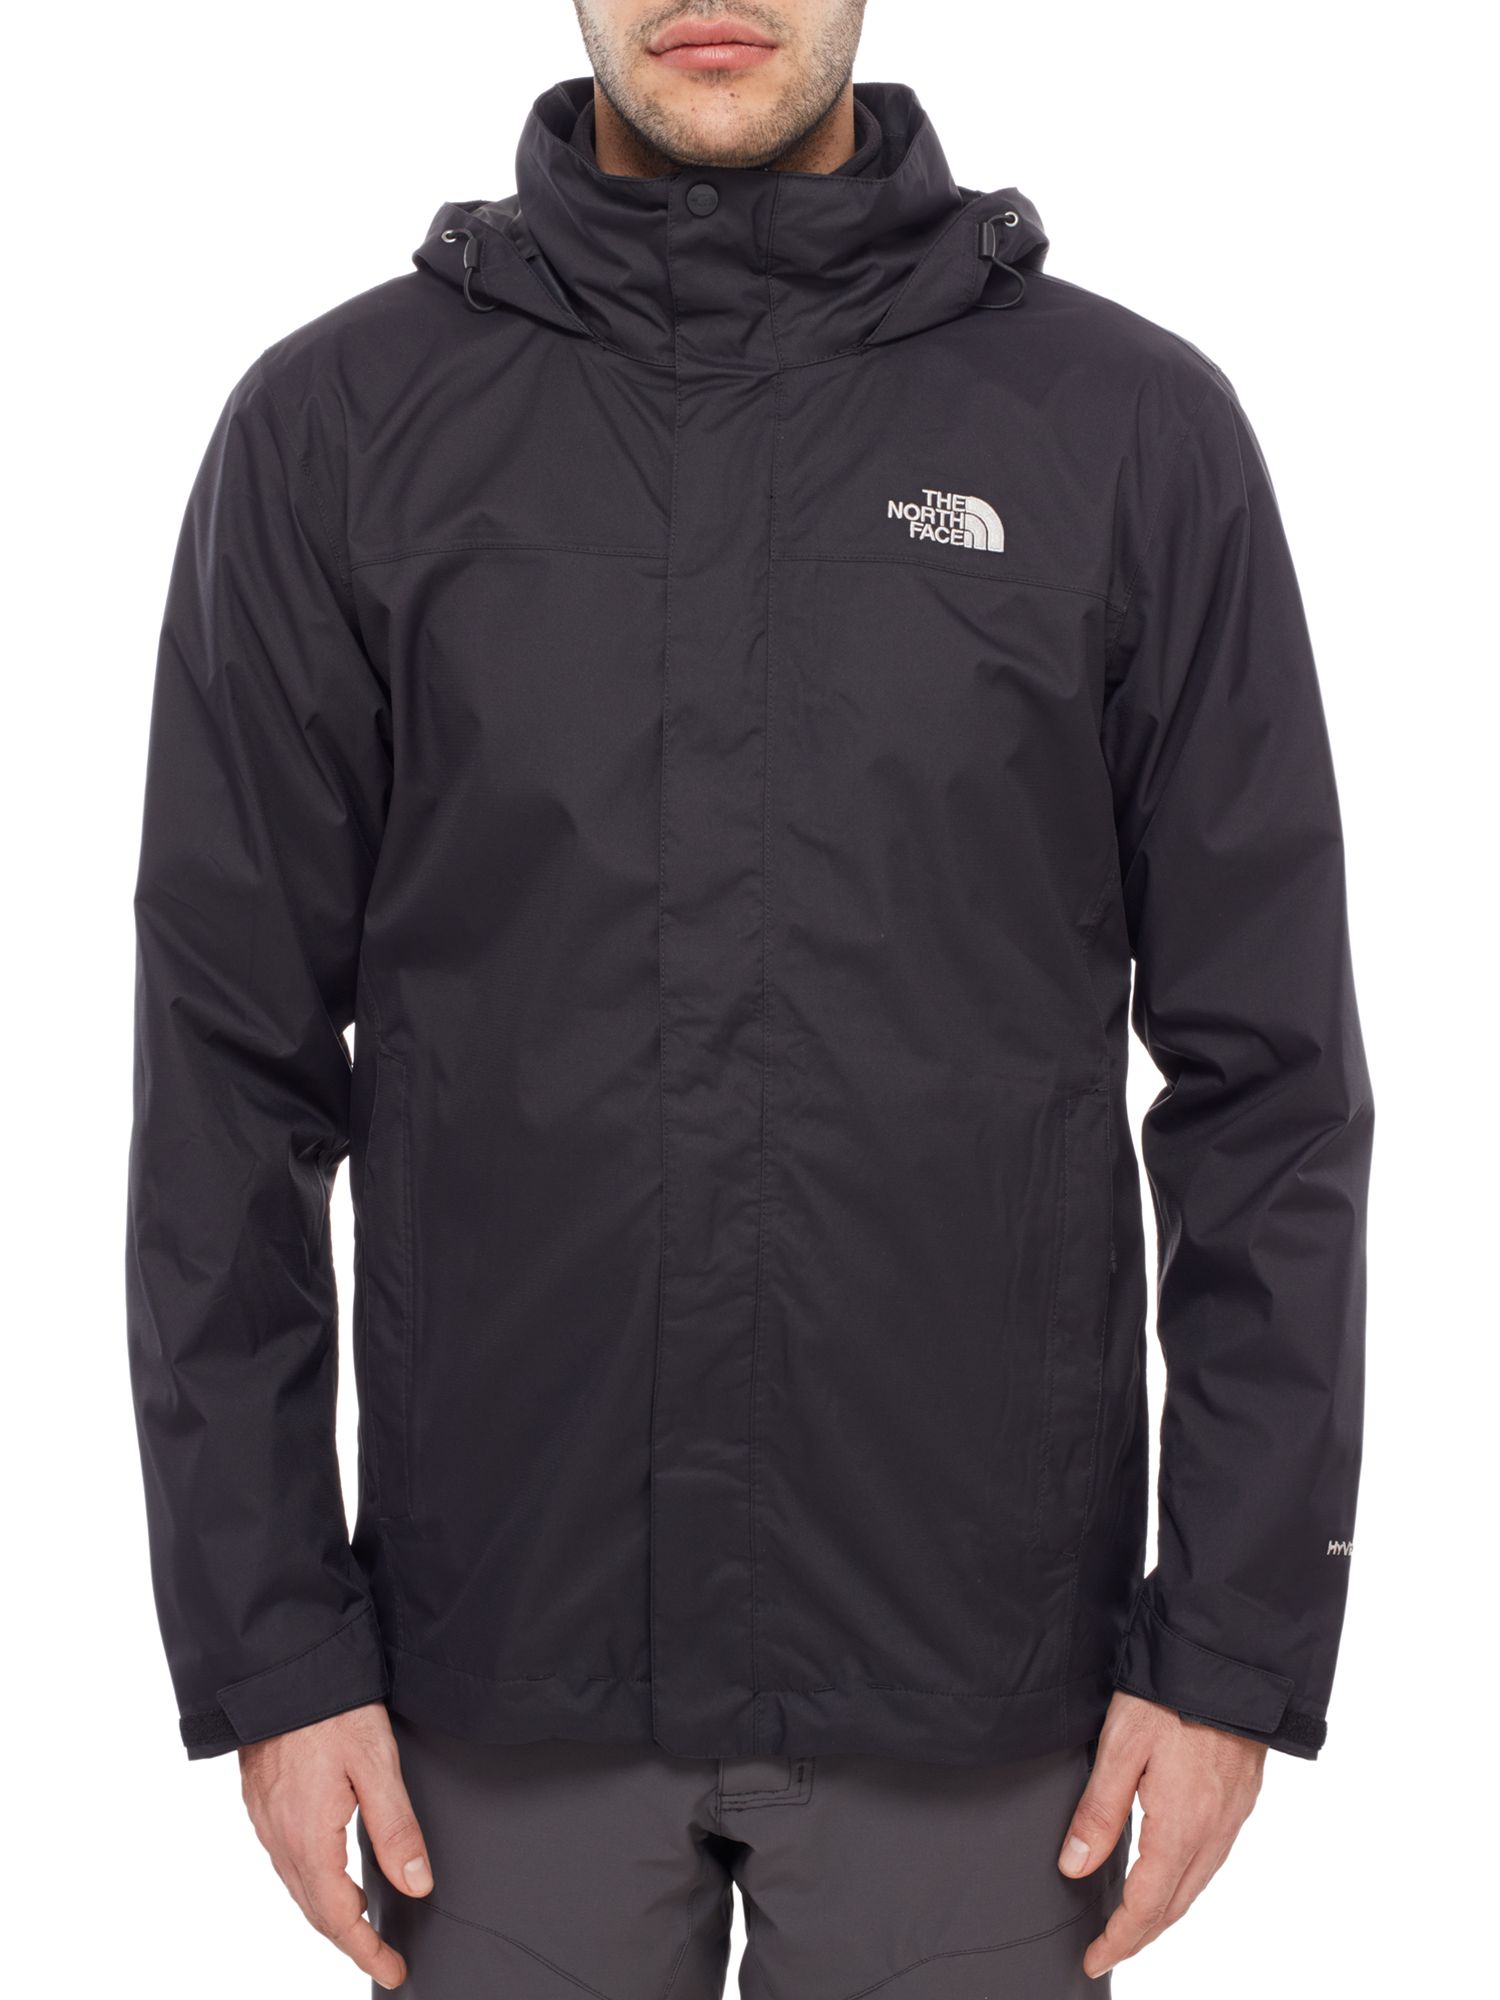 krma Stalno med the north face hyvent 3 